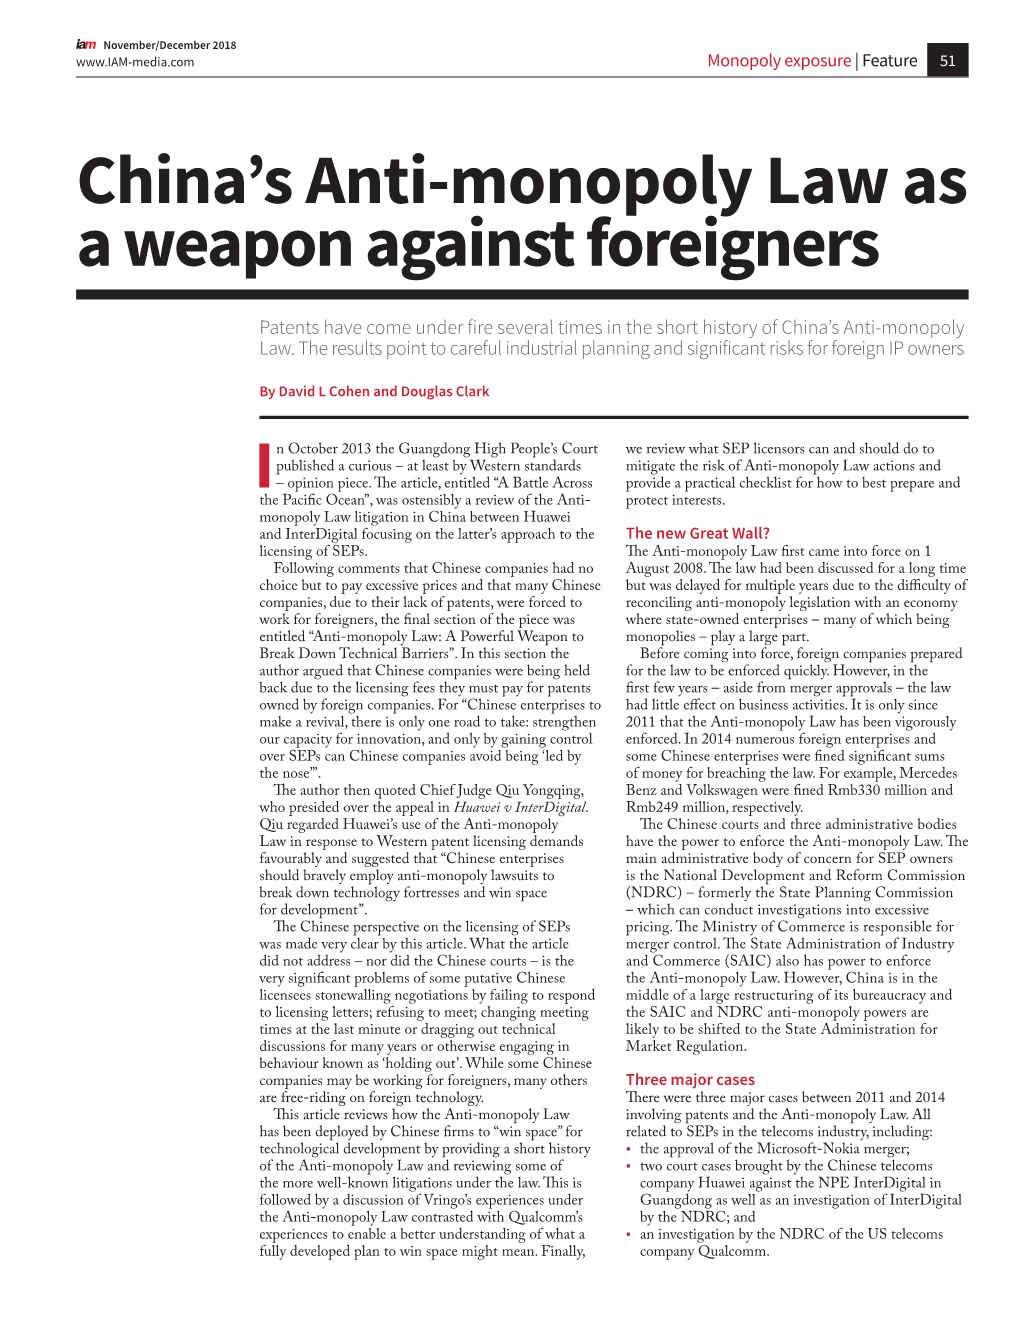 China's Anti-Monopoly Law As a Weapon Against Foreigners